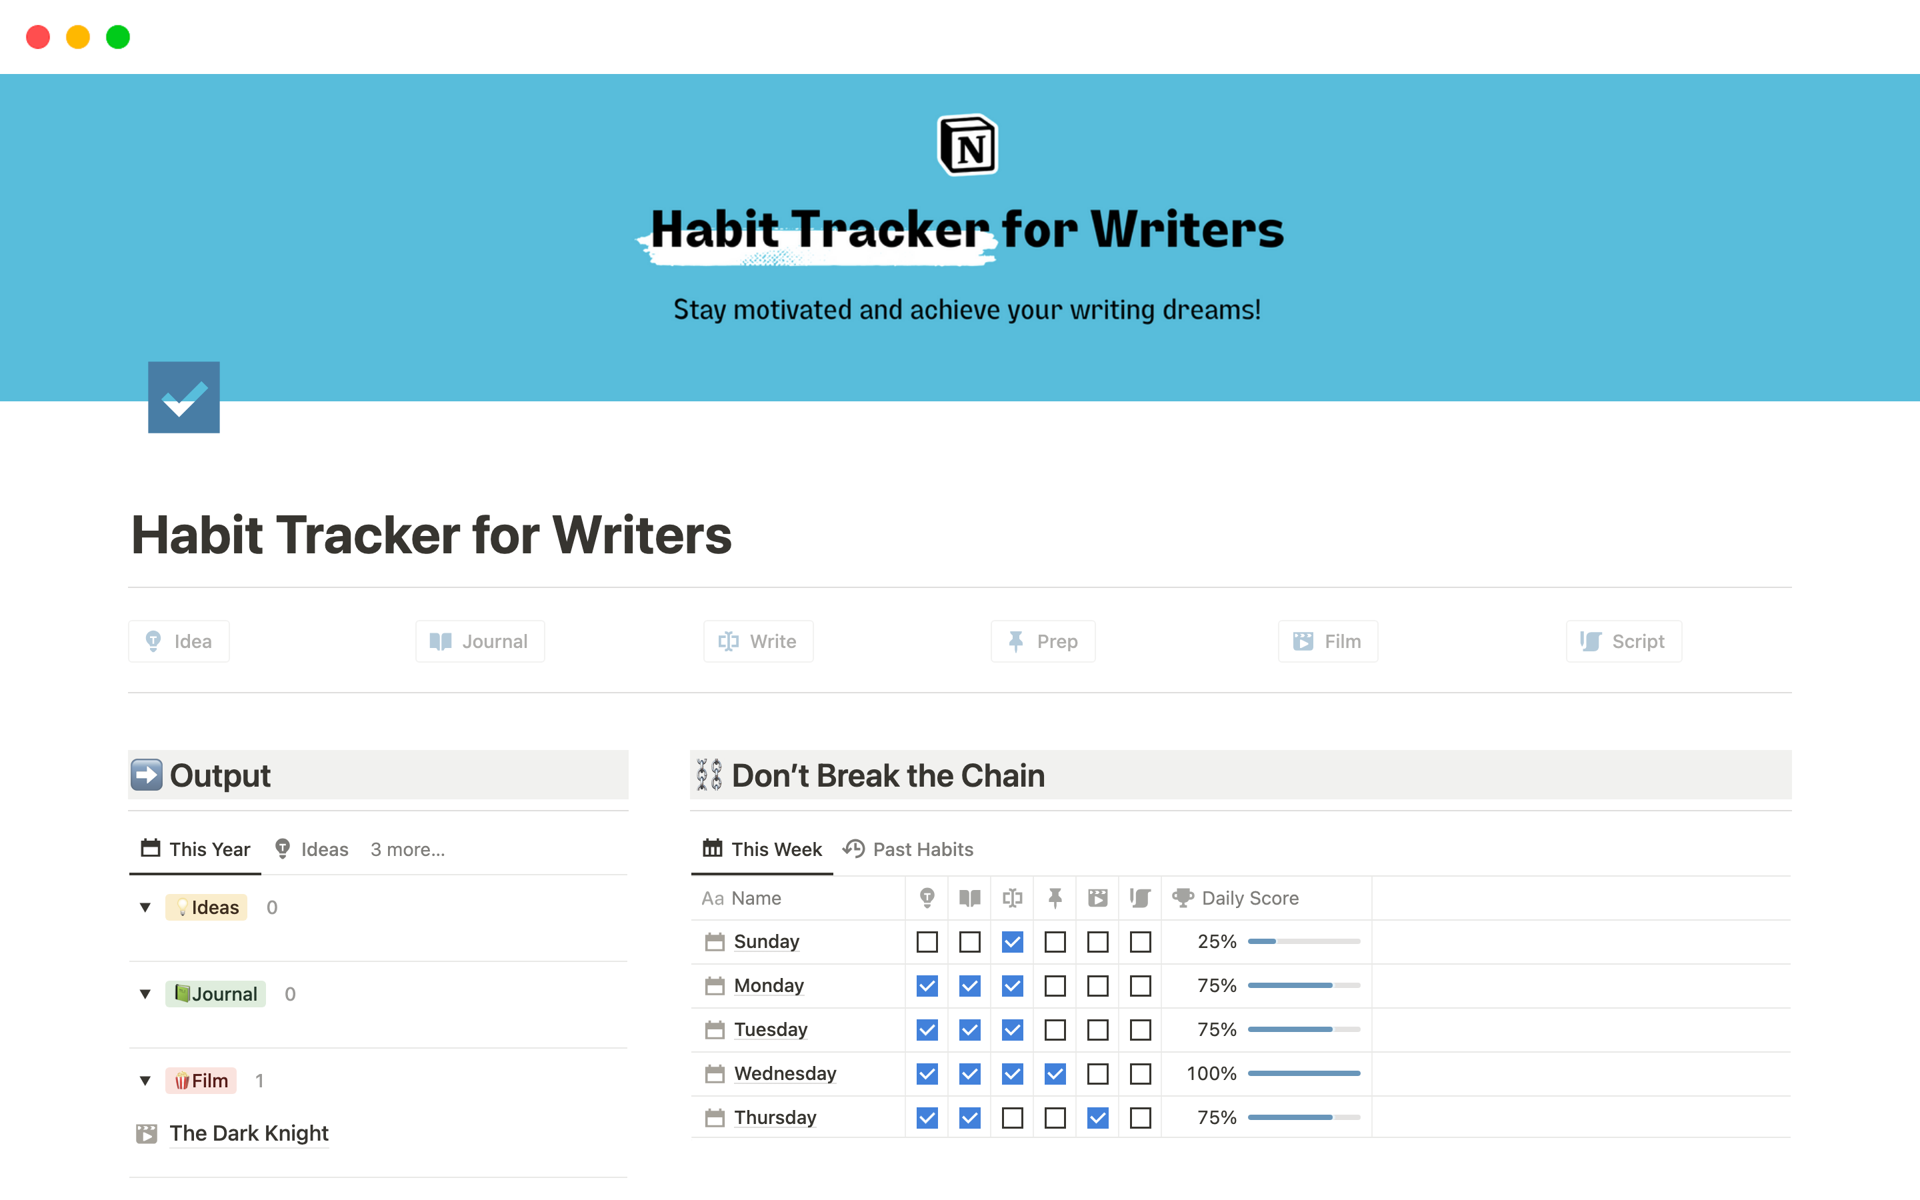 Welcome to The Writer’s Workout; a Notion habit tracker built specifically for writers and screenwriters.